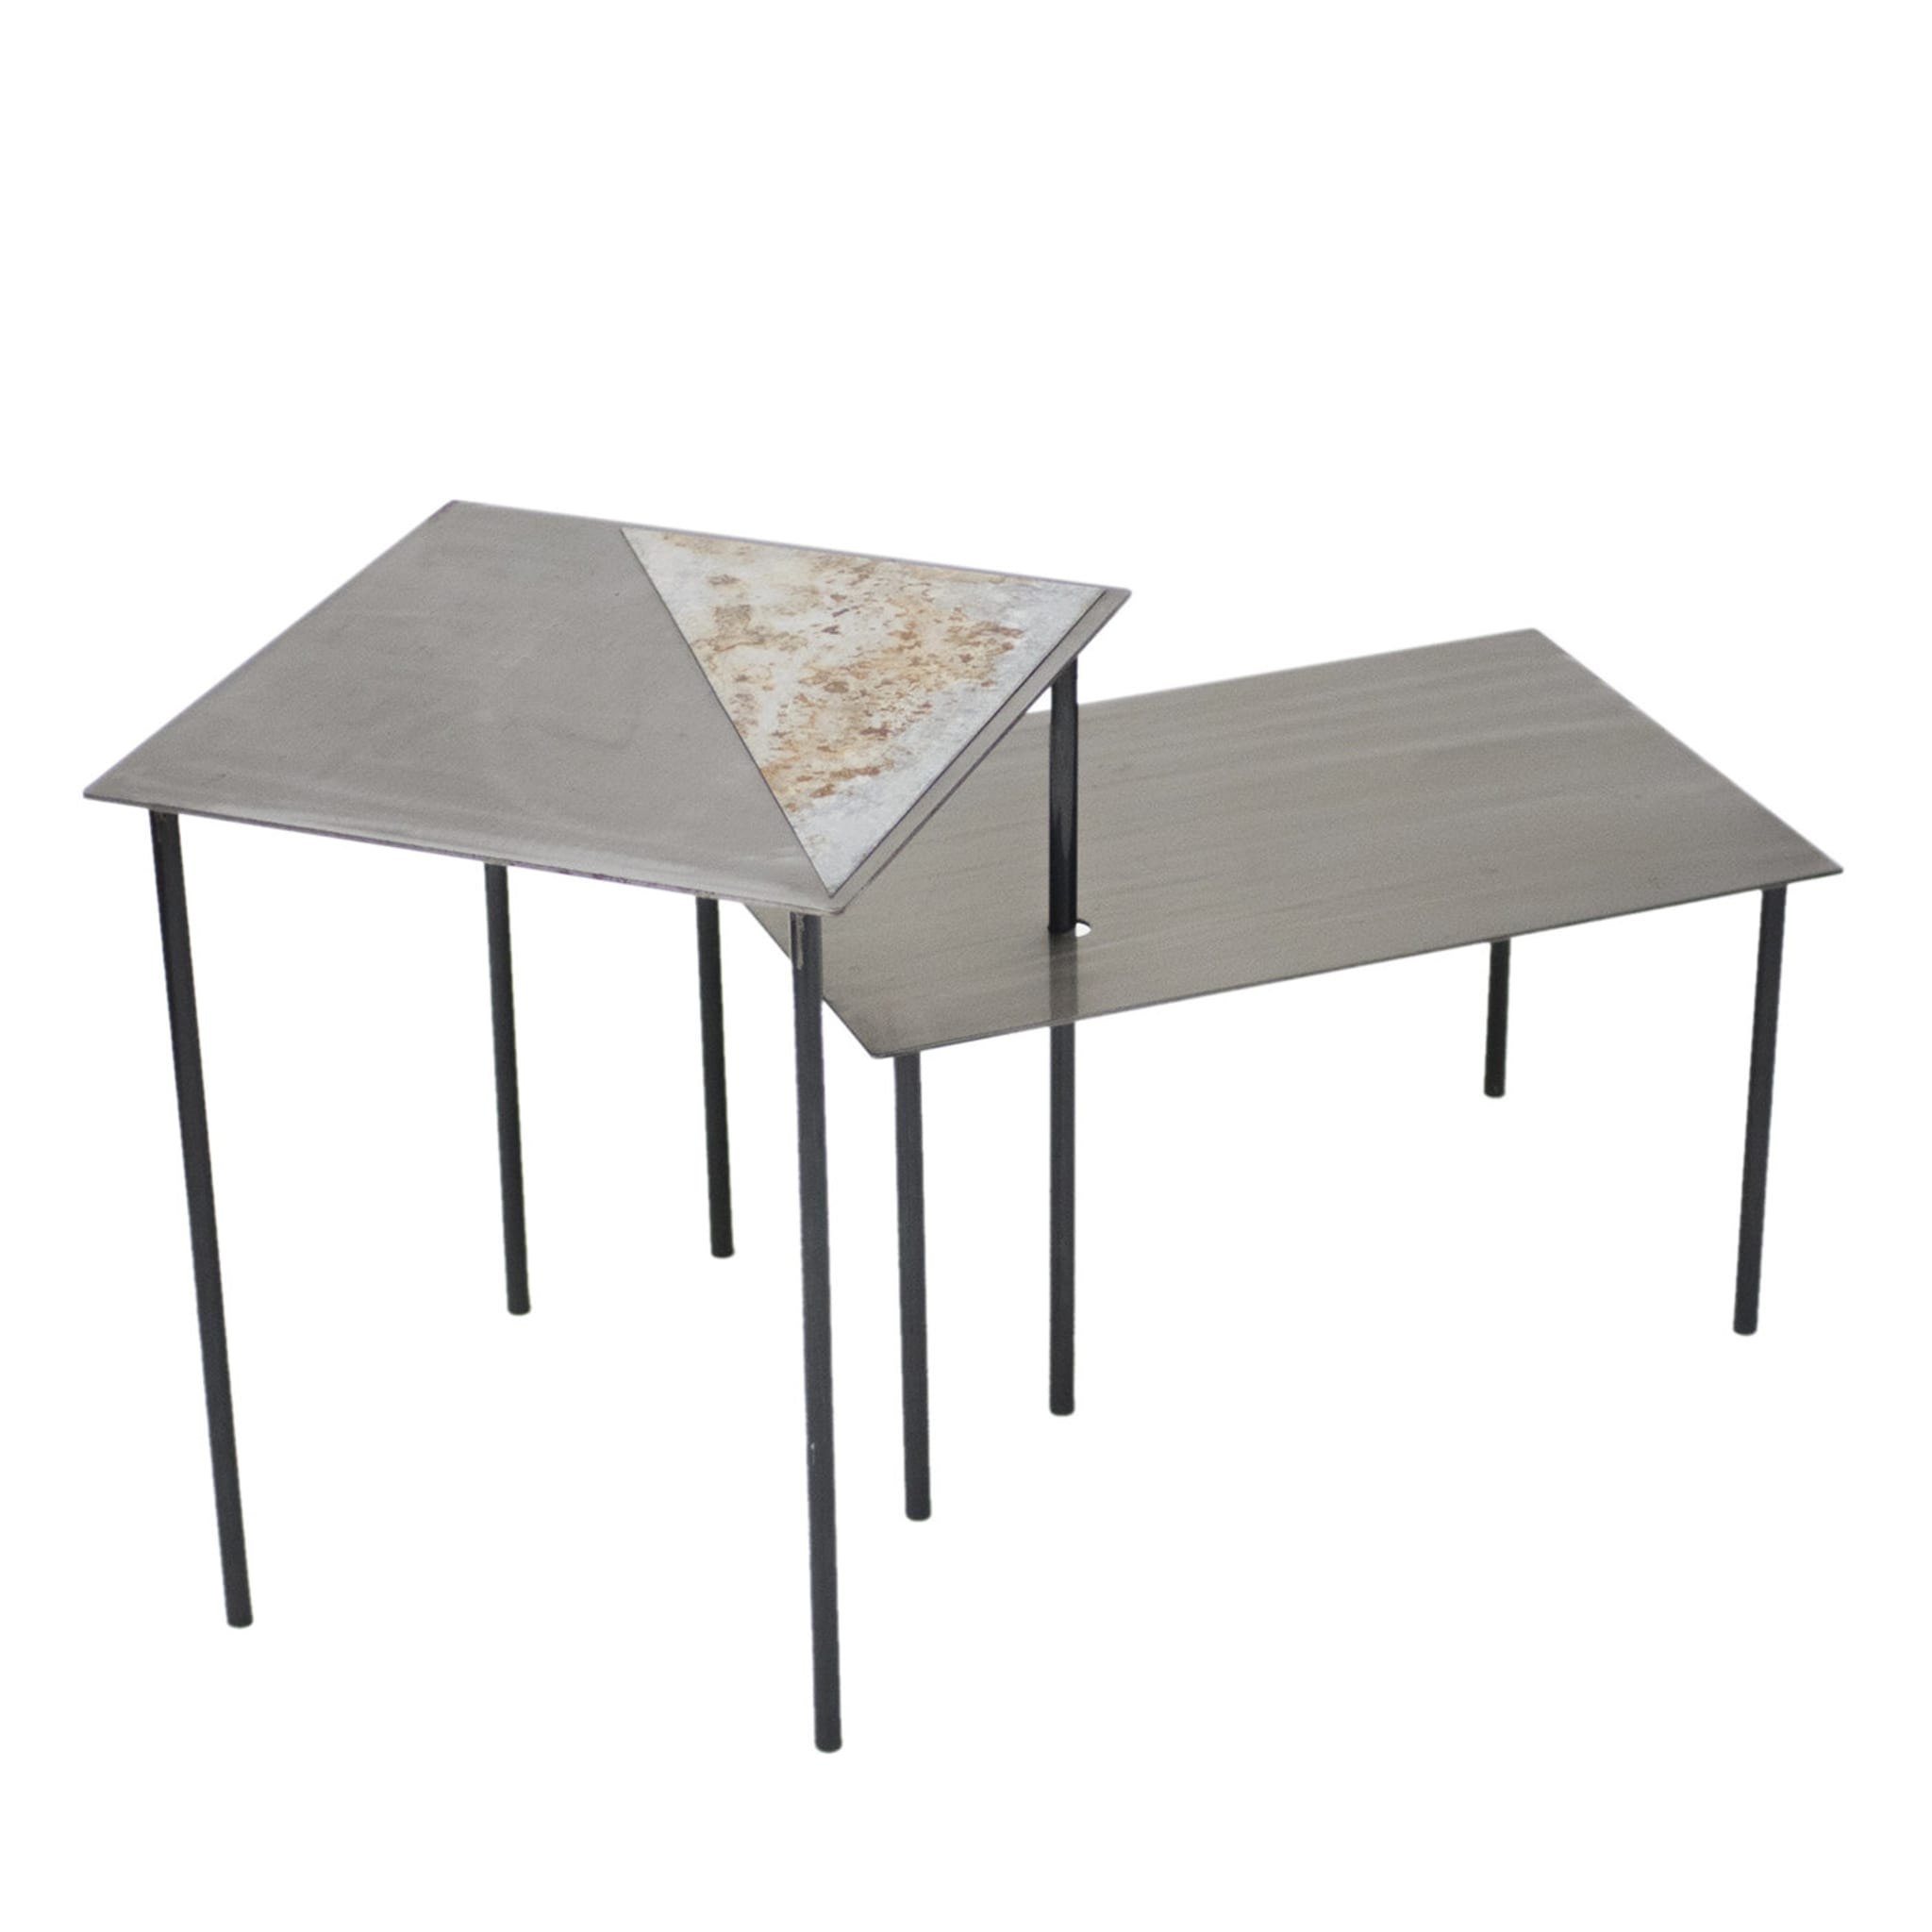 Set of 2 Nesting Tables - Main view